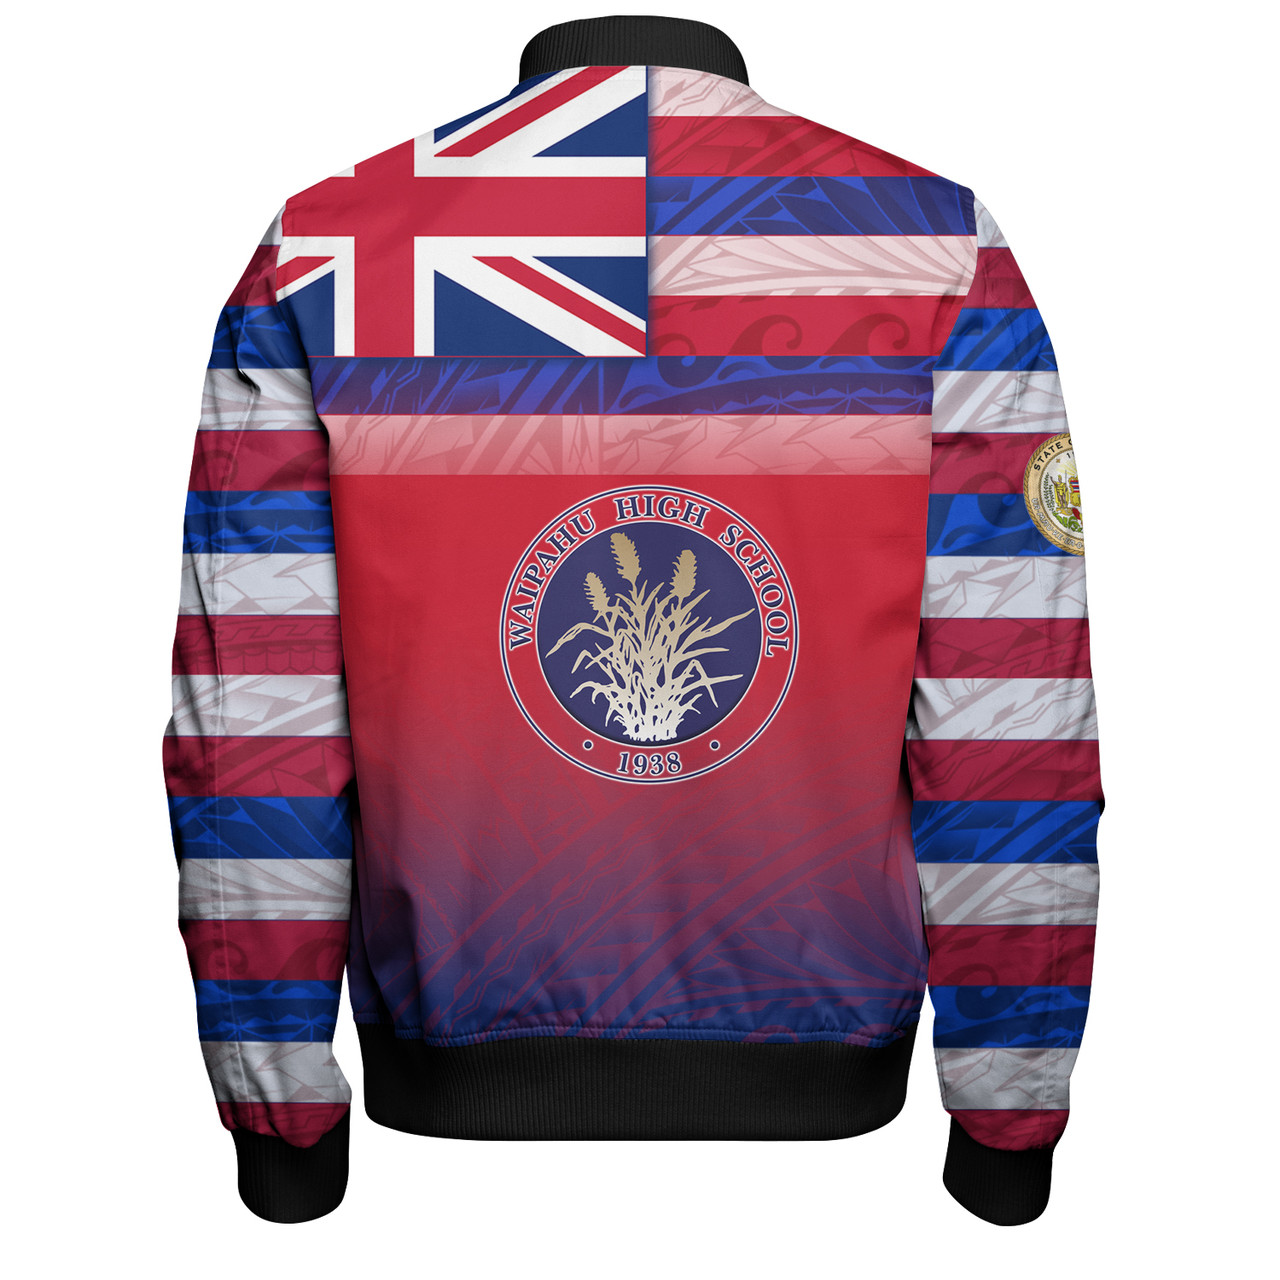 Hawaii Waipahu High School Bomber Jacket Flag Color With Traditional Patterns